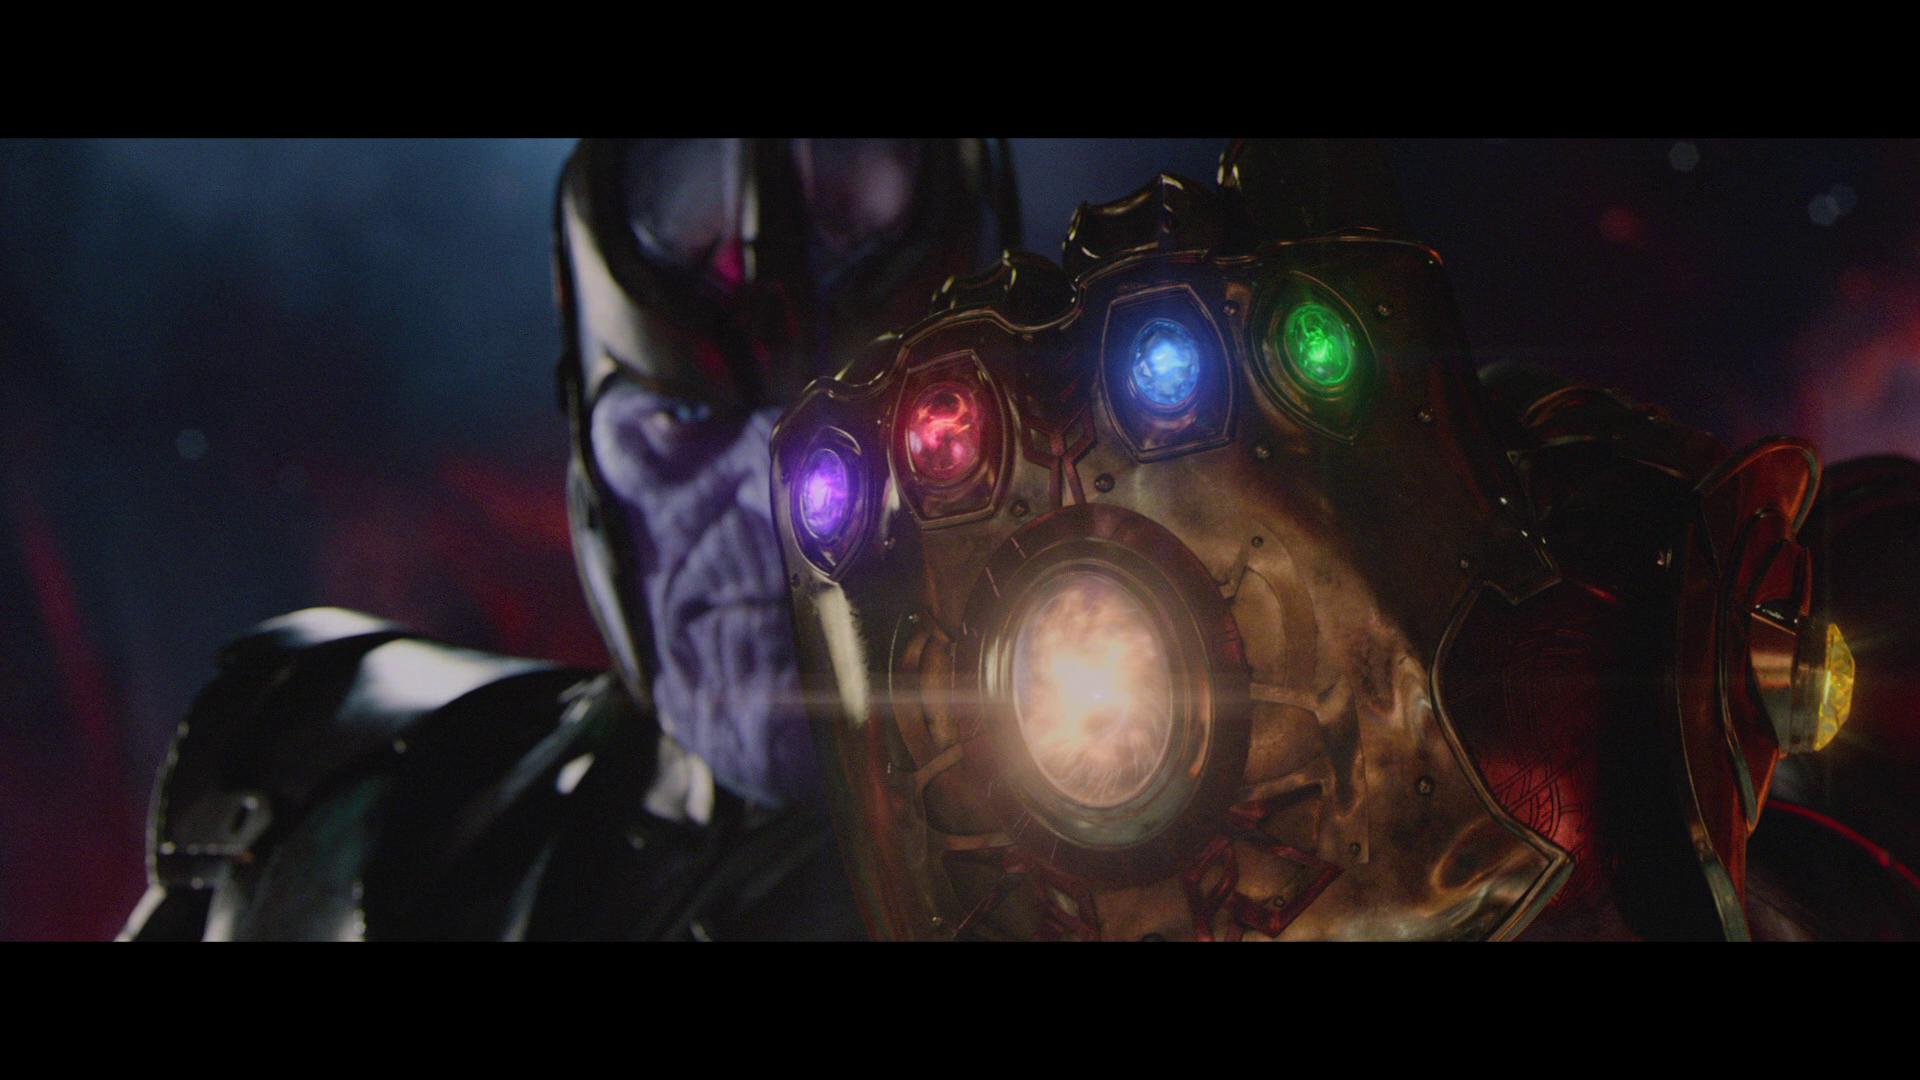 THANOS' Completes The Infinity Gauntlet In HQ AVENGERS: INFINITY